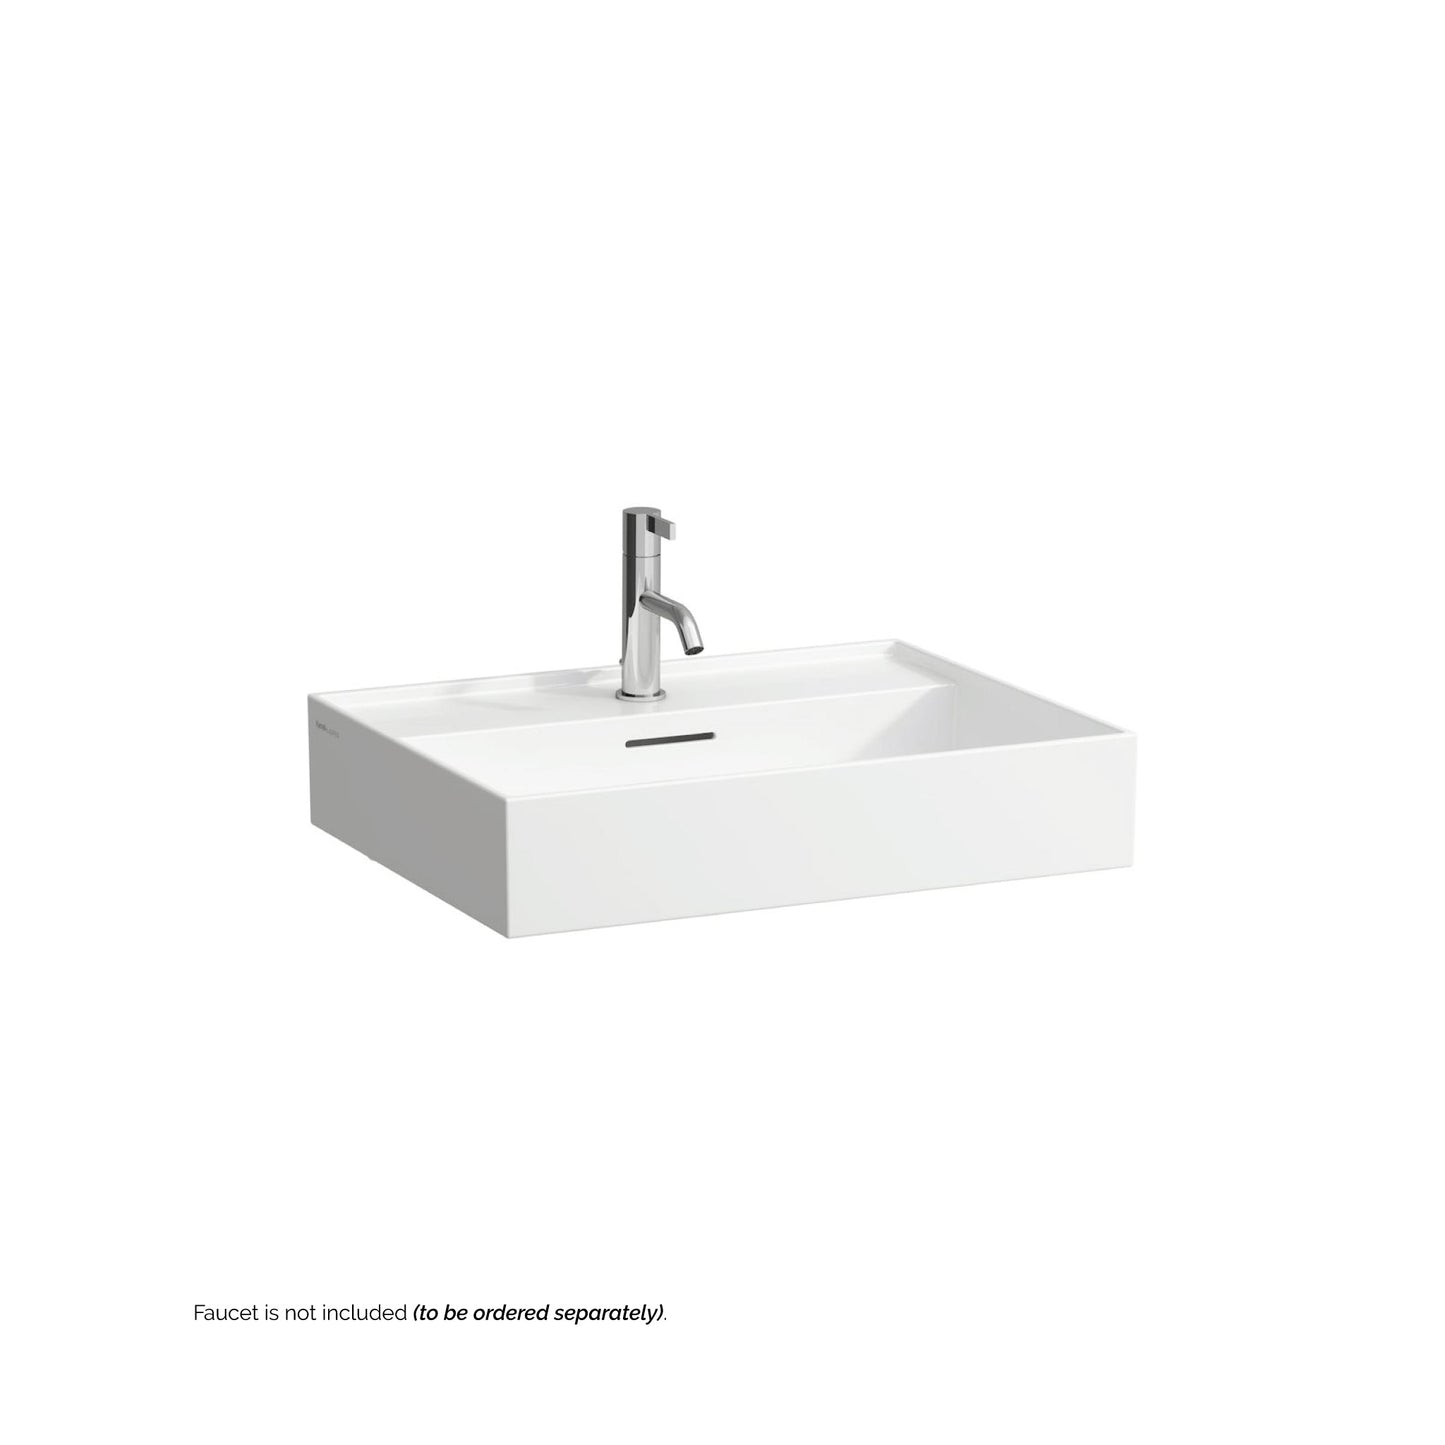 Laufen Kartell 24" x 18" White Wall-Mounted Bathroom Sink With Faucet Hole